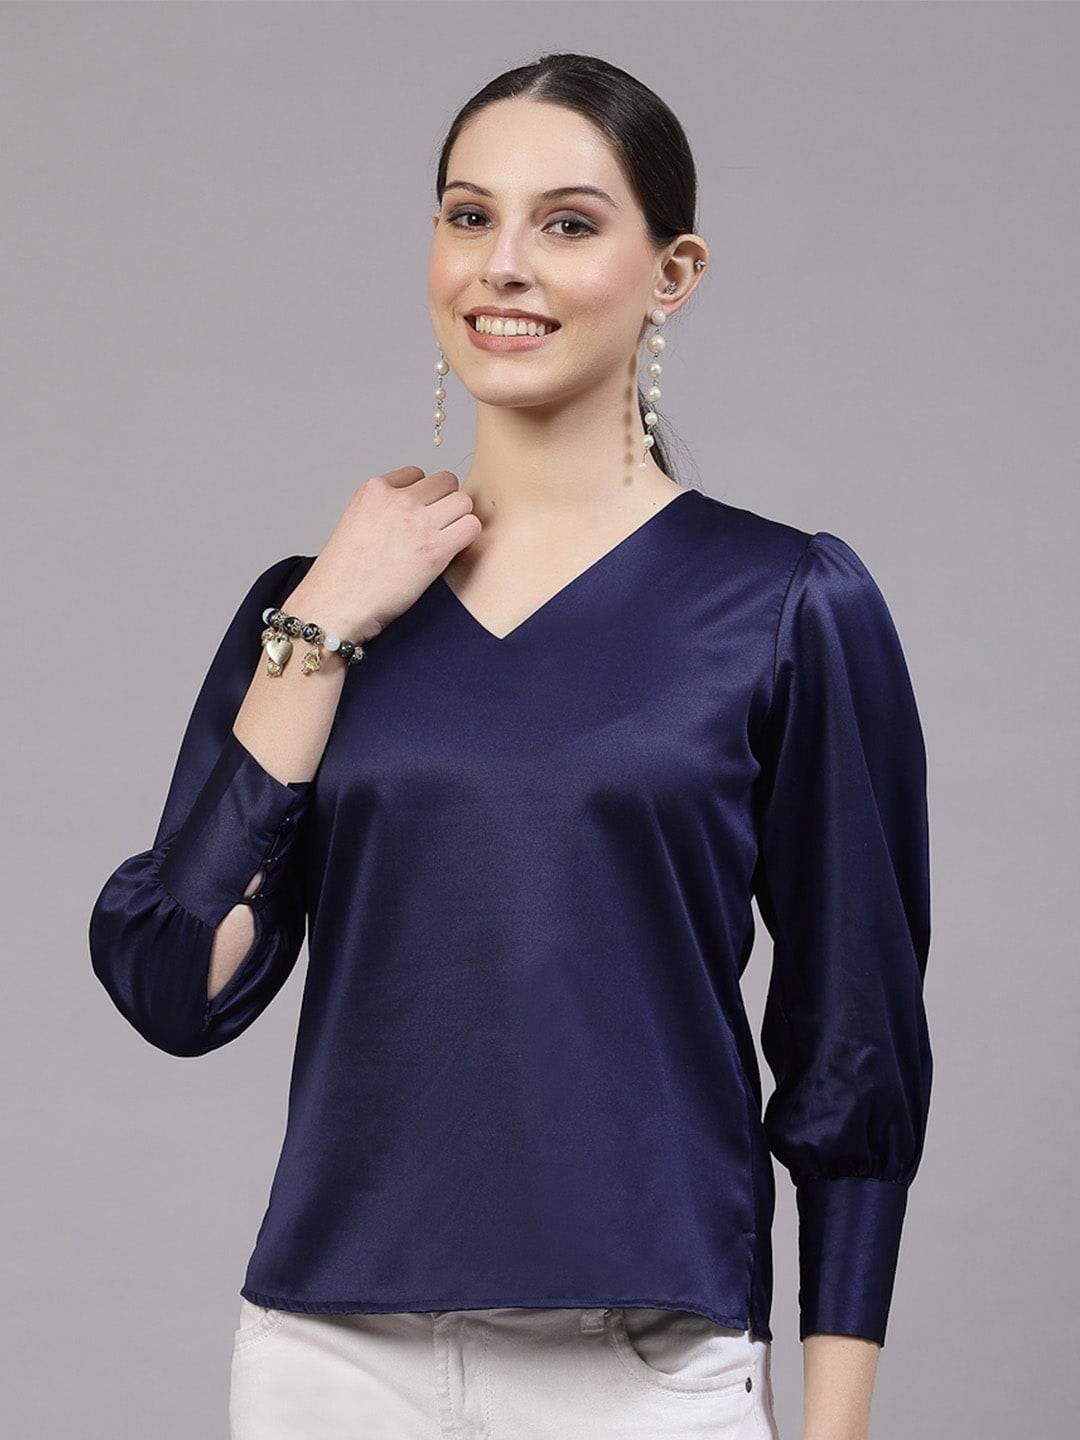 style-quotient-v-neck-cuffed-sleeves-satin-top